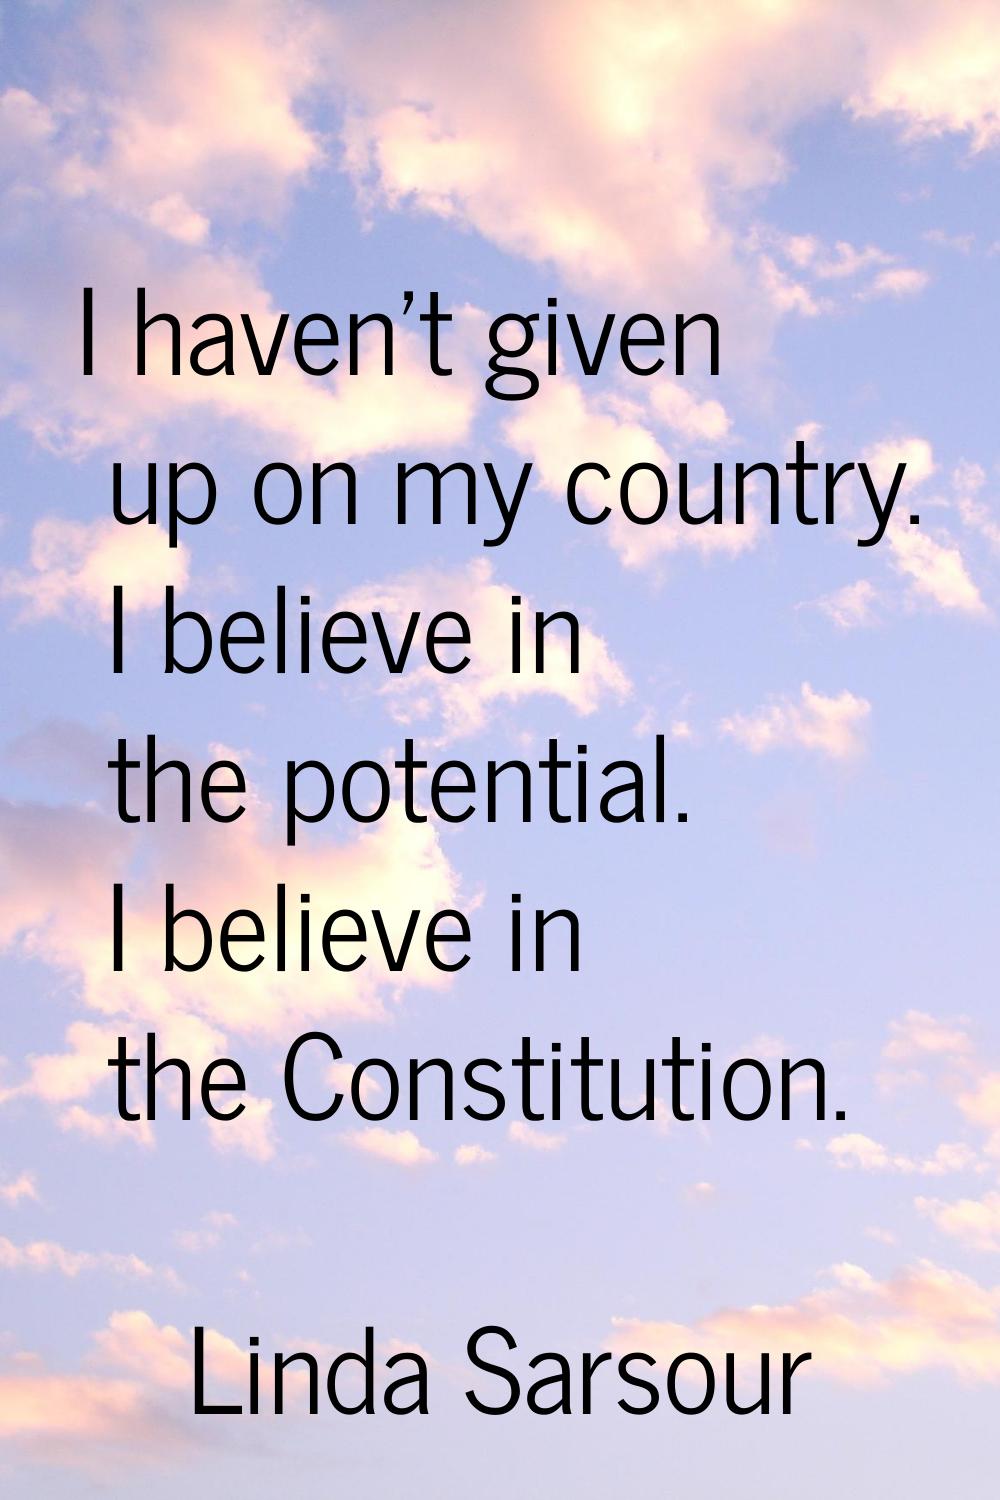 I haven't given up on my country. I believe in the potential. I believe in the Constitution.